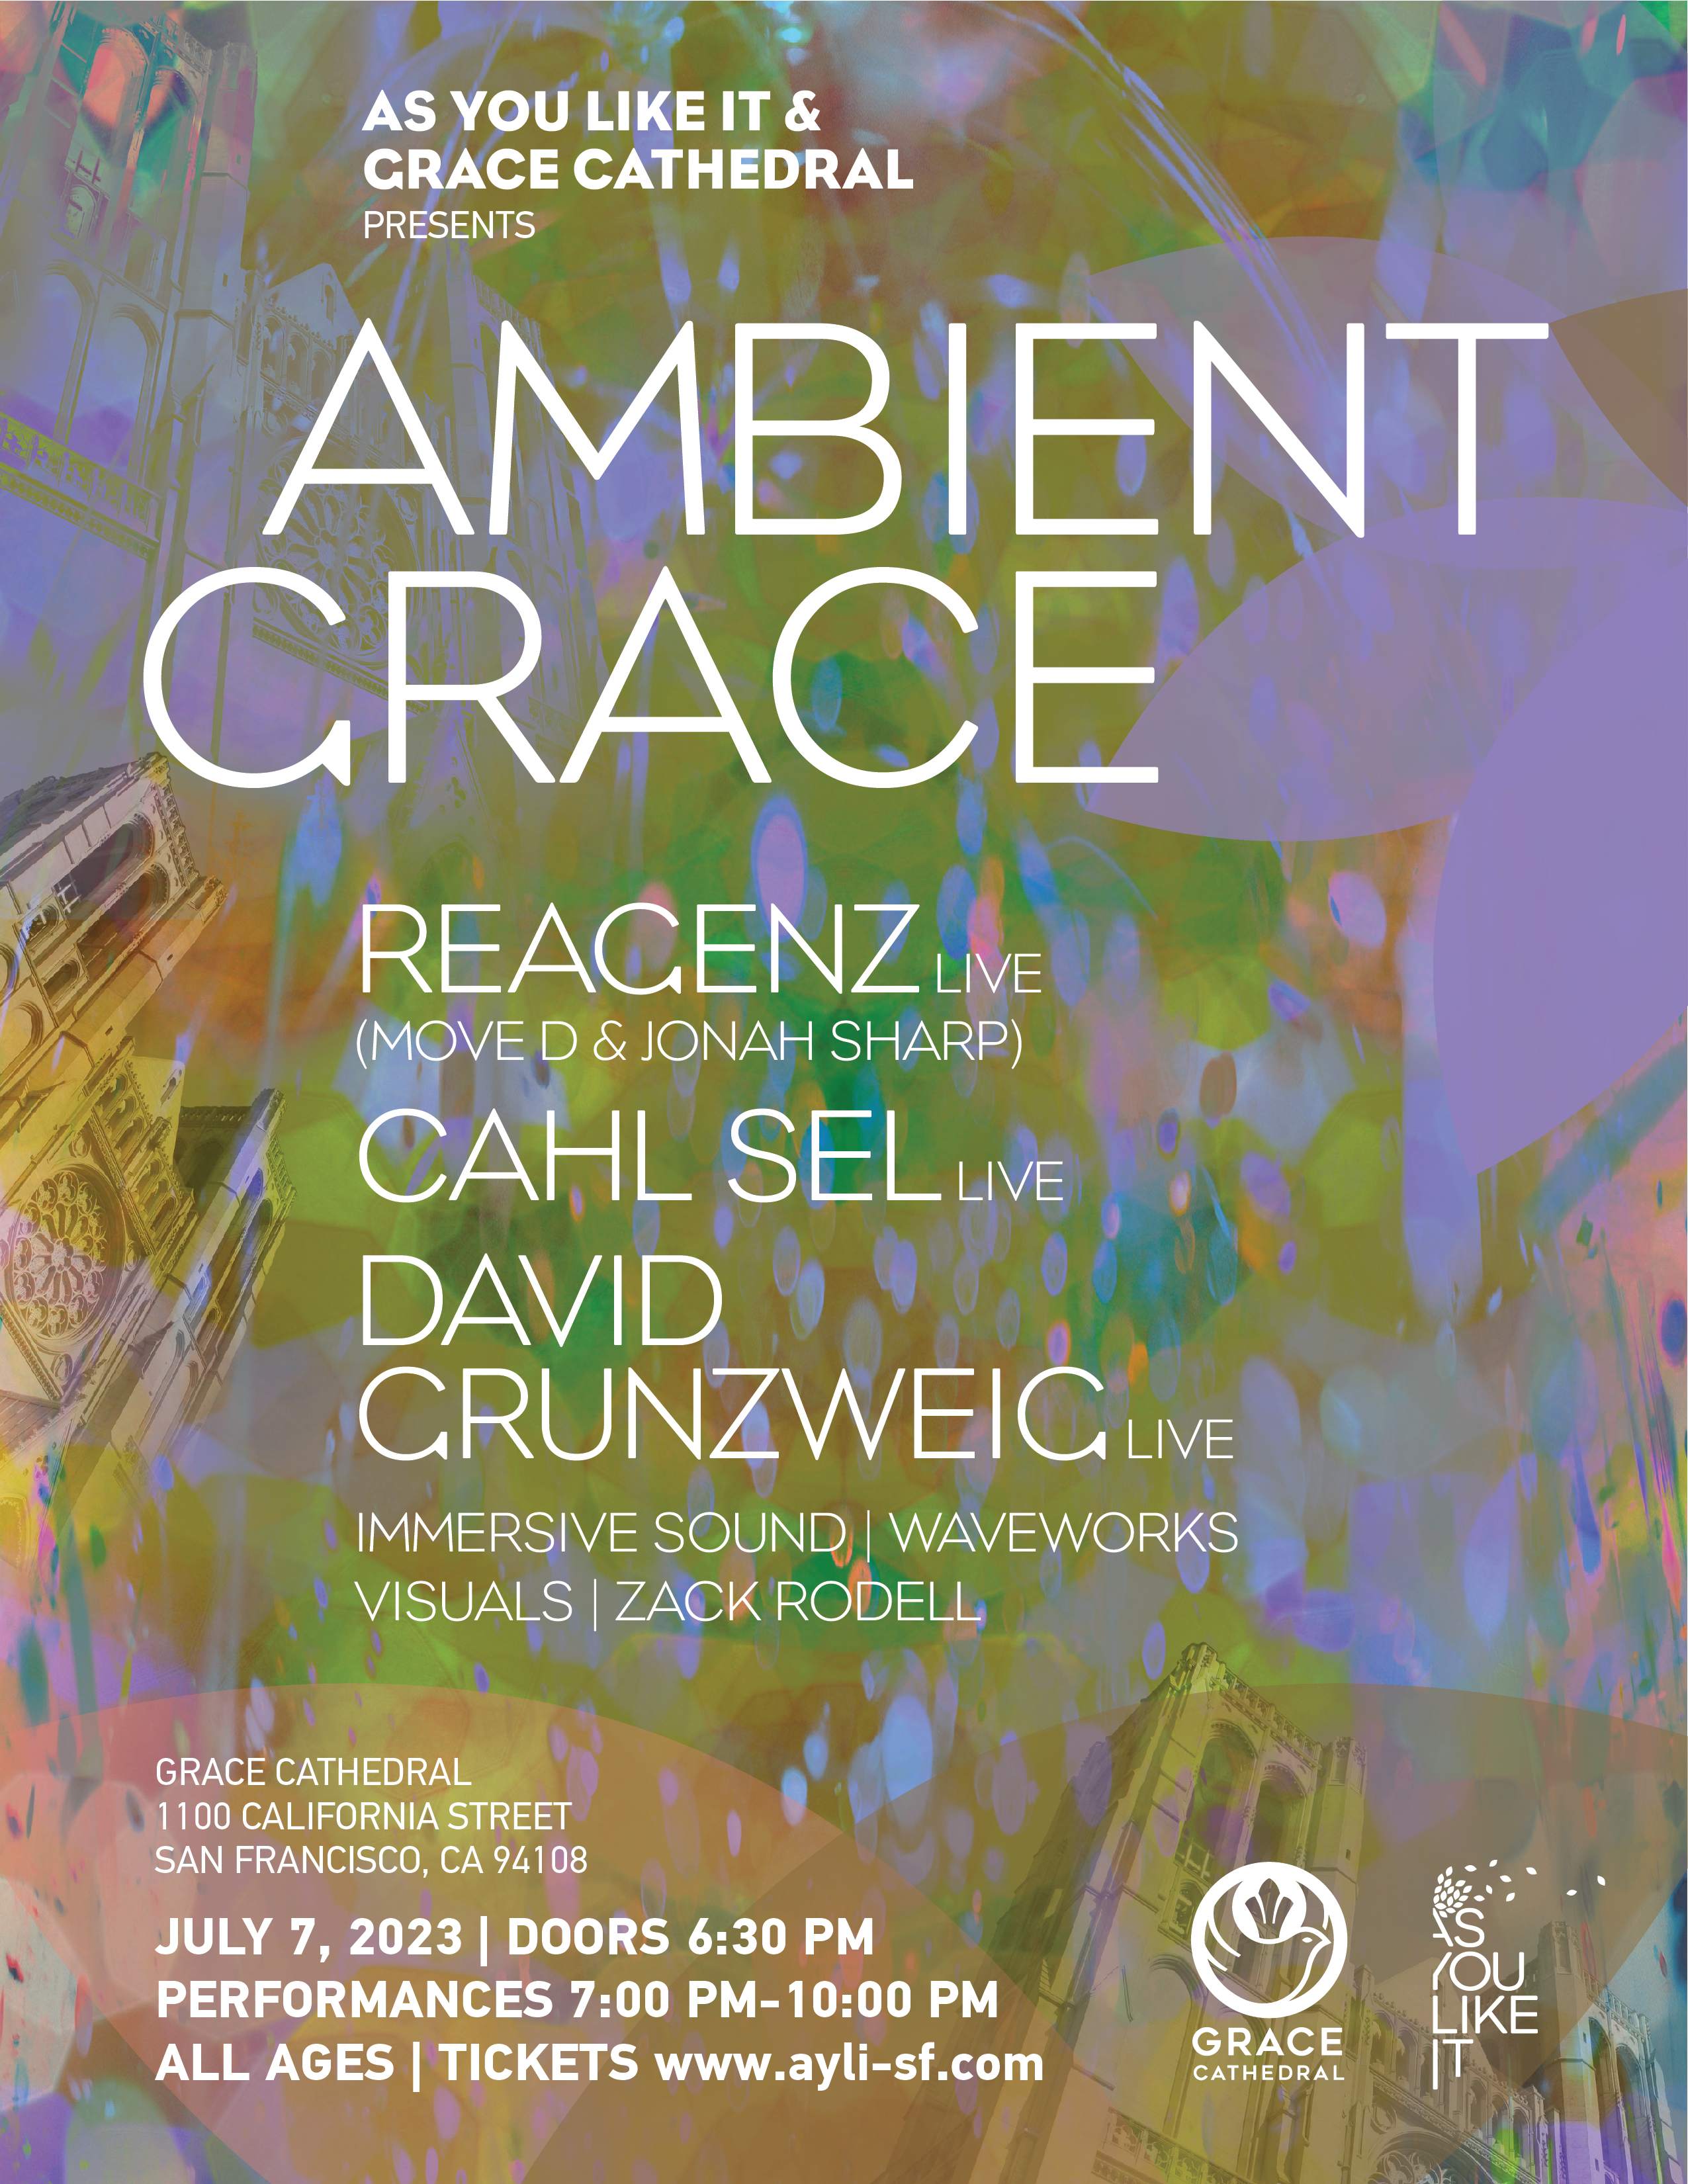 Ambient Grace with Reagenz LIVE (Move D & Jonah Sharp) - フライヤー表